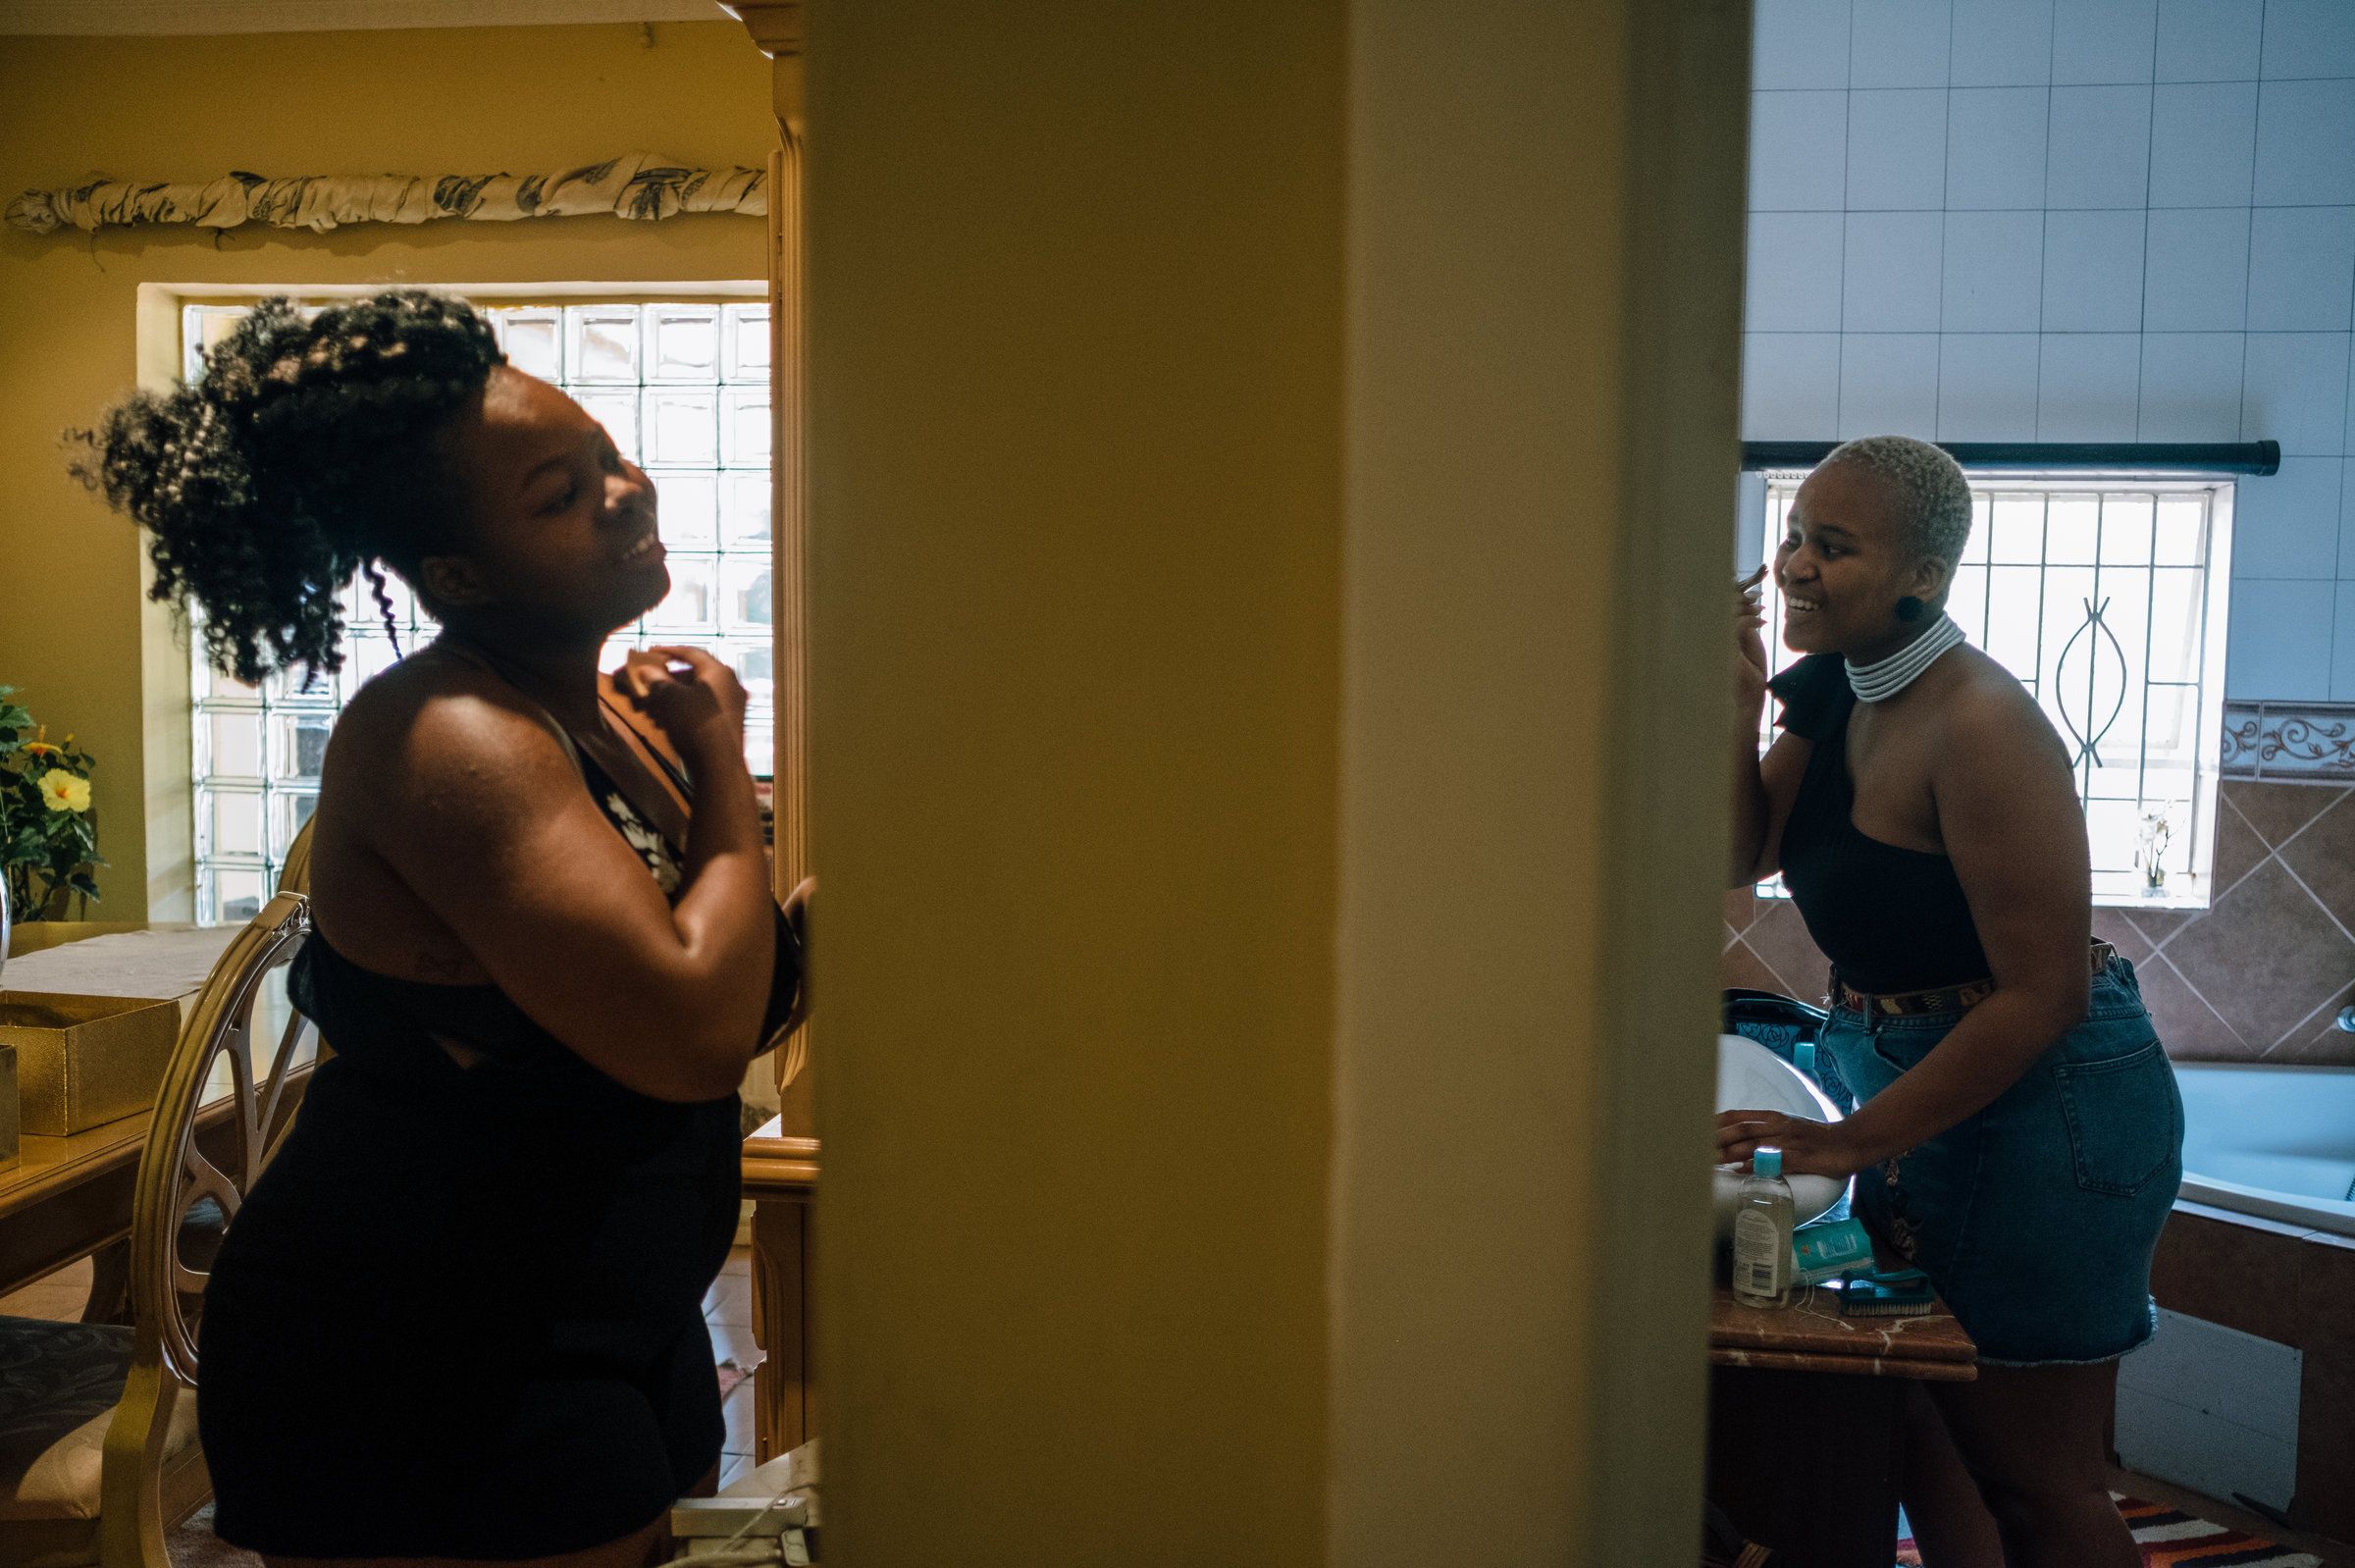 Cousins Mpho Rantao, 21, (left) and Ntaoleng Mokotini, 21, apply makeup in preparation for the Afropunk Joburg event later that day. Image by Melissa Bunni Elian. South Africa, 2017.